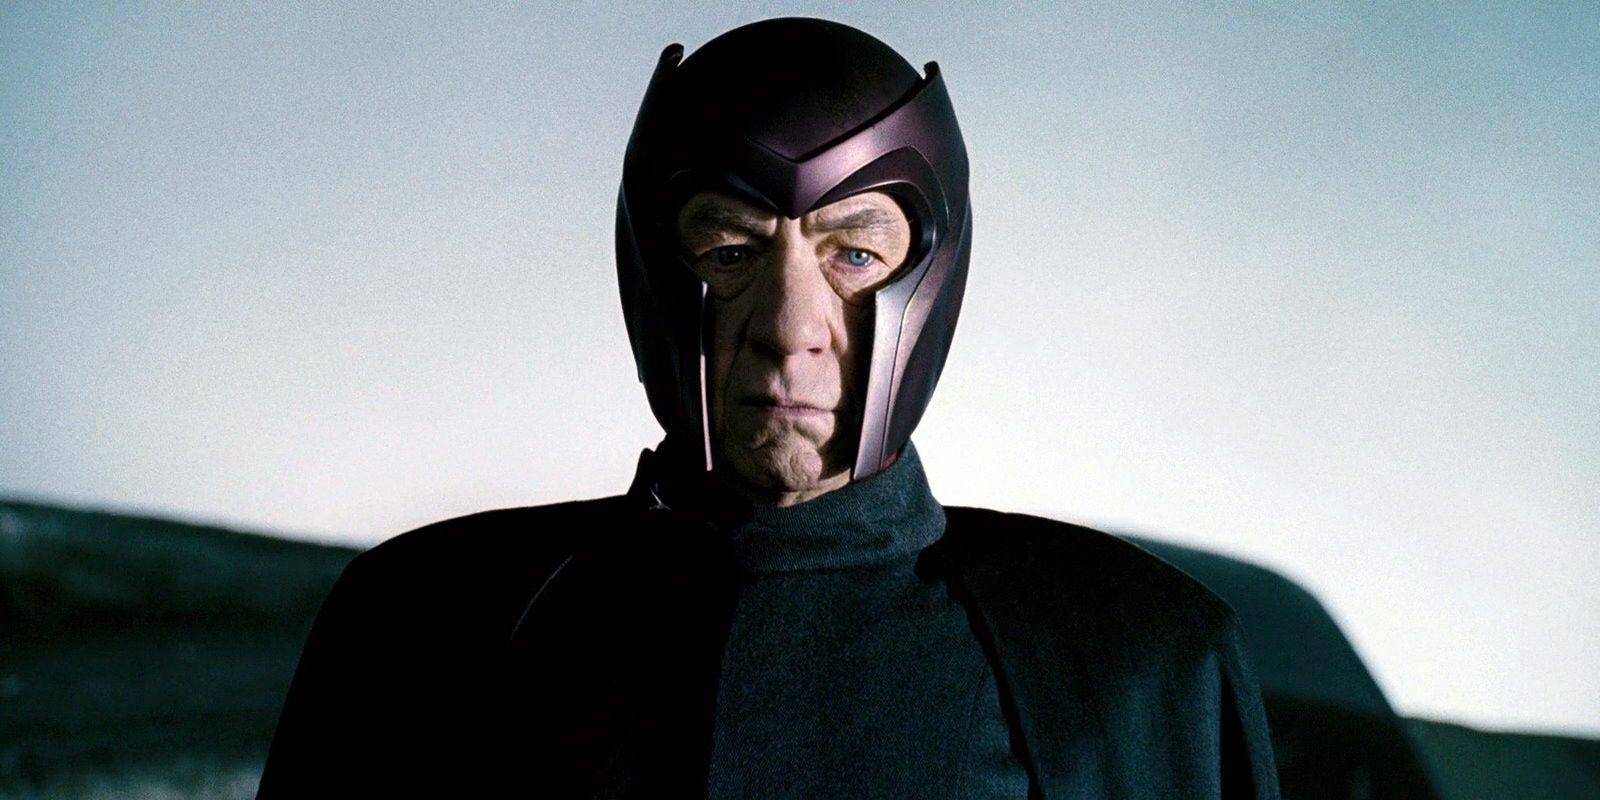 Magneto surrounded by mist in X-Men: The Last Stand.